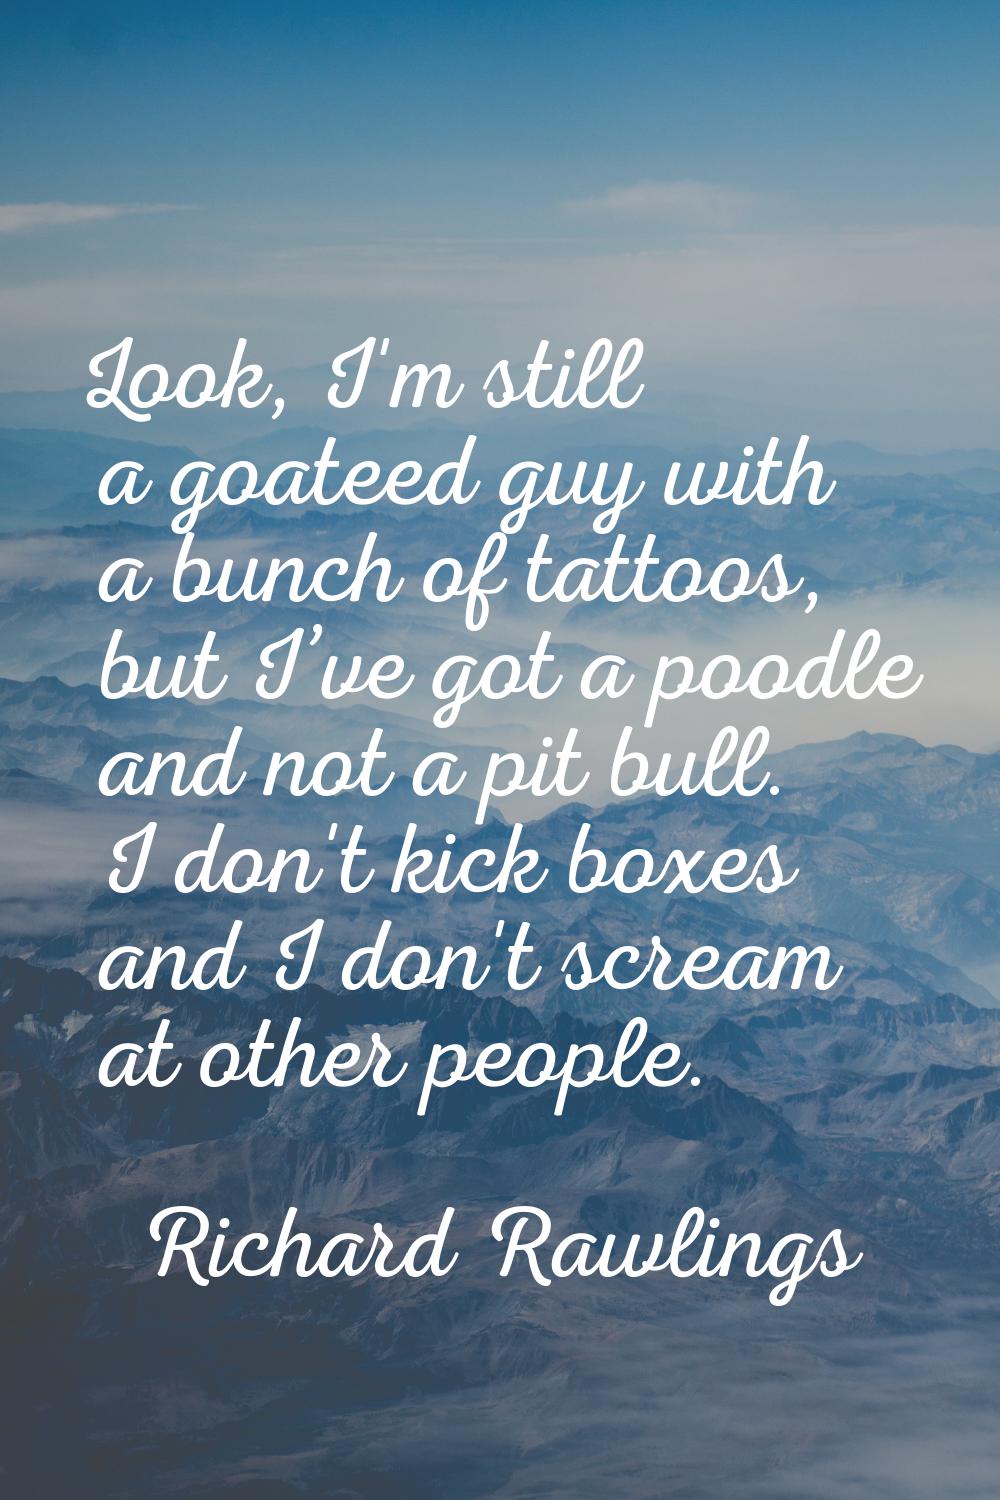 Look, I'm still a goateed guy with a bunch of tattoos, but I’ve got a poodle and not a pit bull. I 